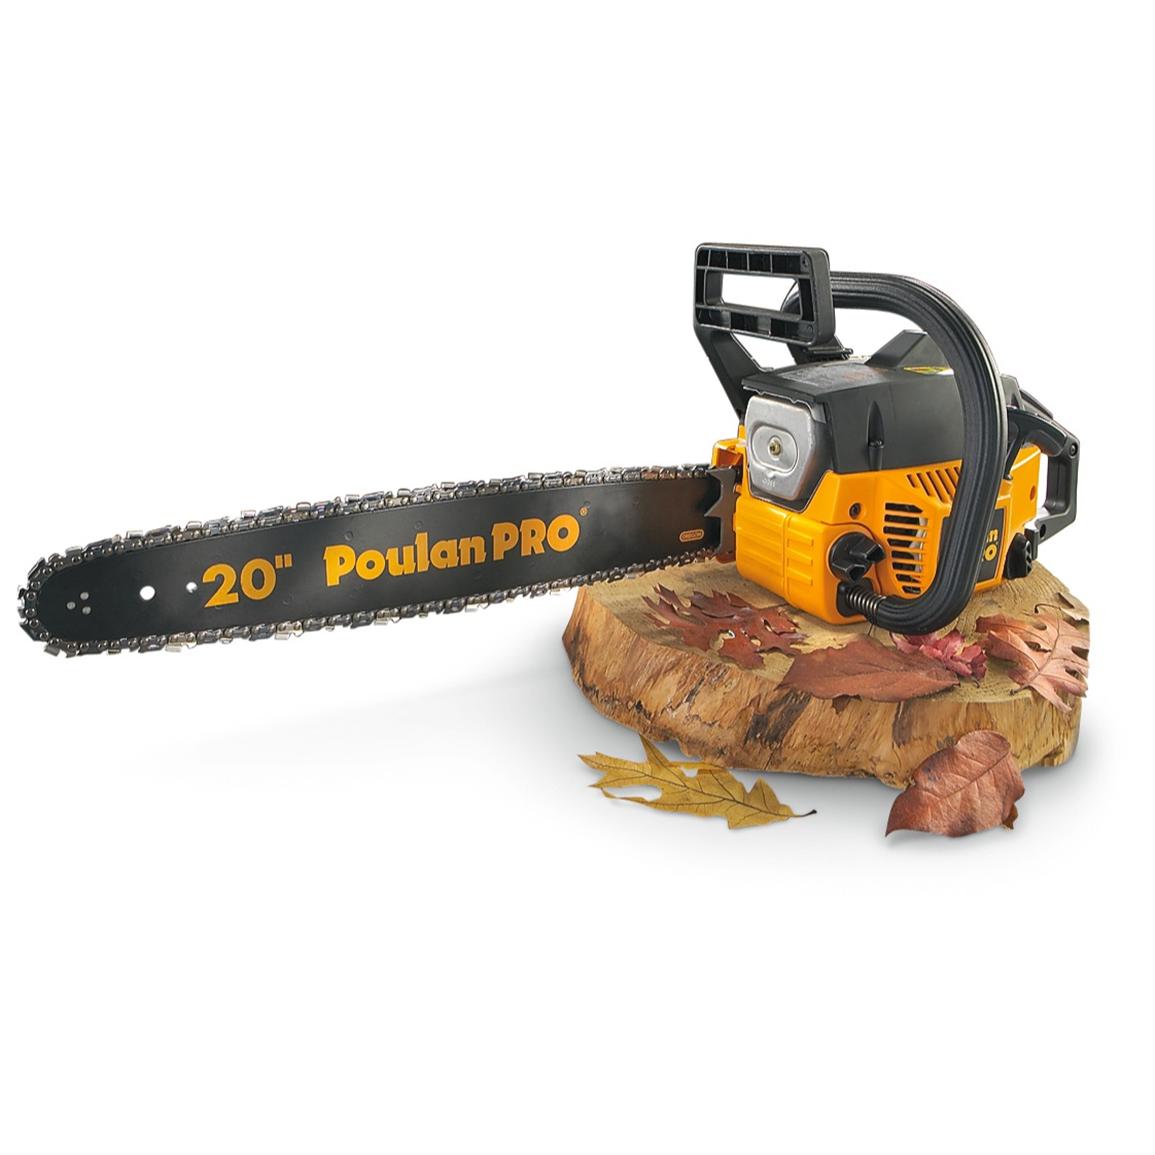 Poulan Pro® 20" Chainsaw (Factory Refurbished) - 205263, Saws